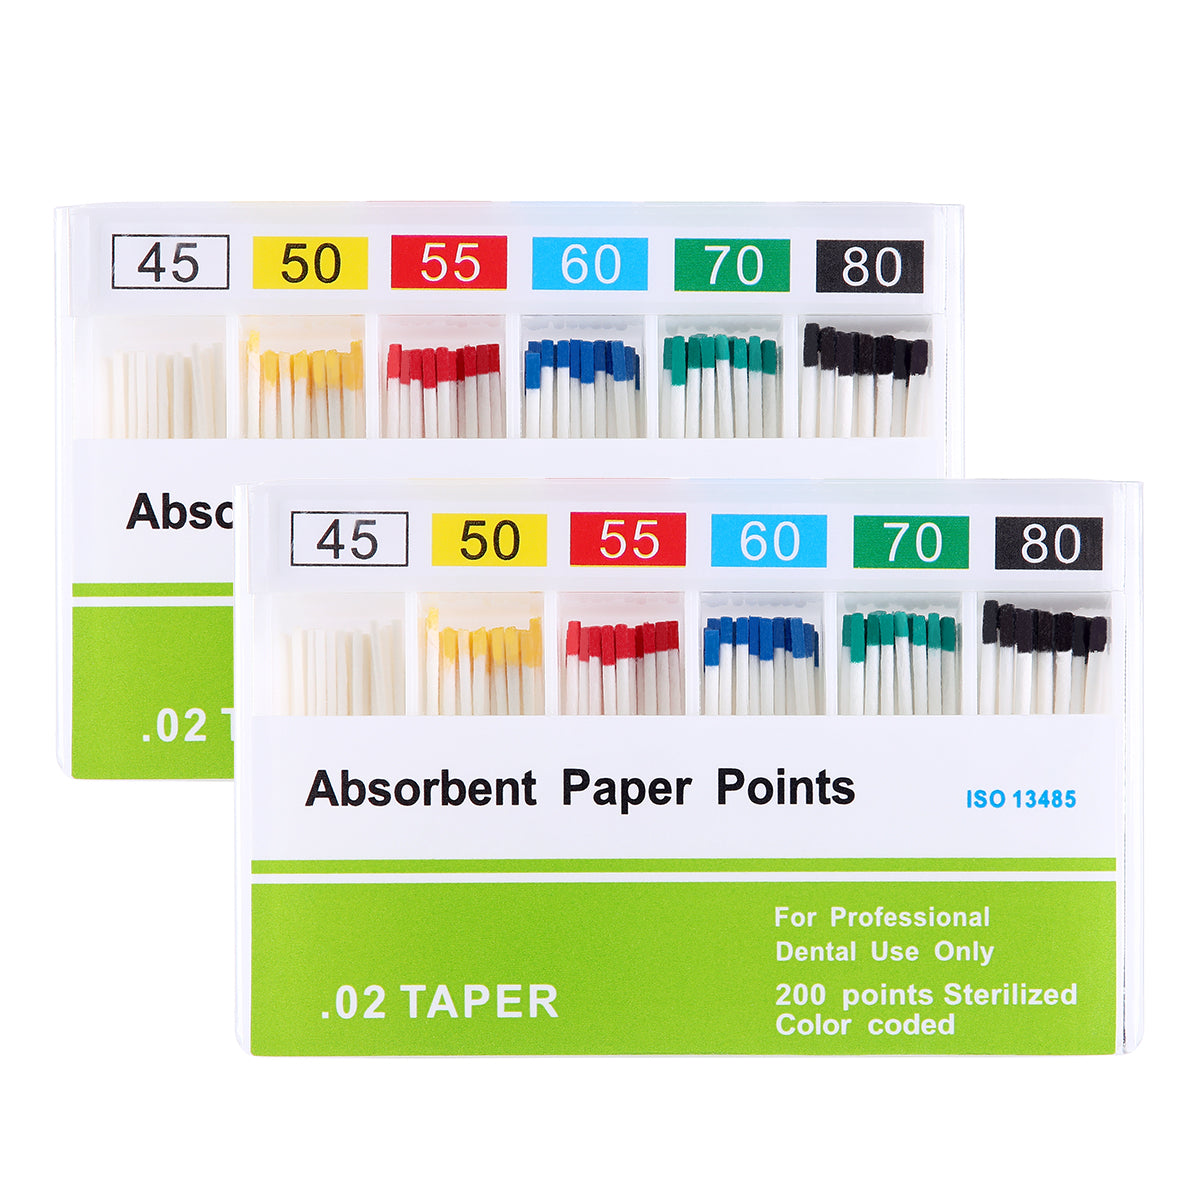 2 Boxes Absorbent Paper Points #45-80 Taper Size 0.02 Color Coded 200/Box - azdentall.com